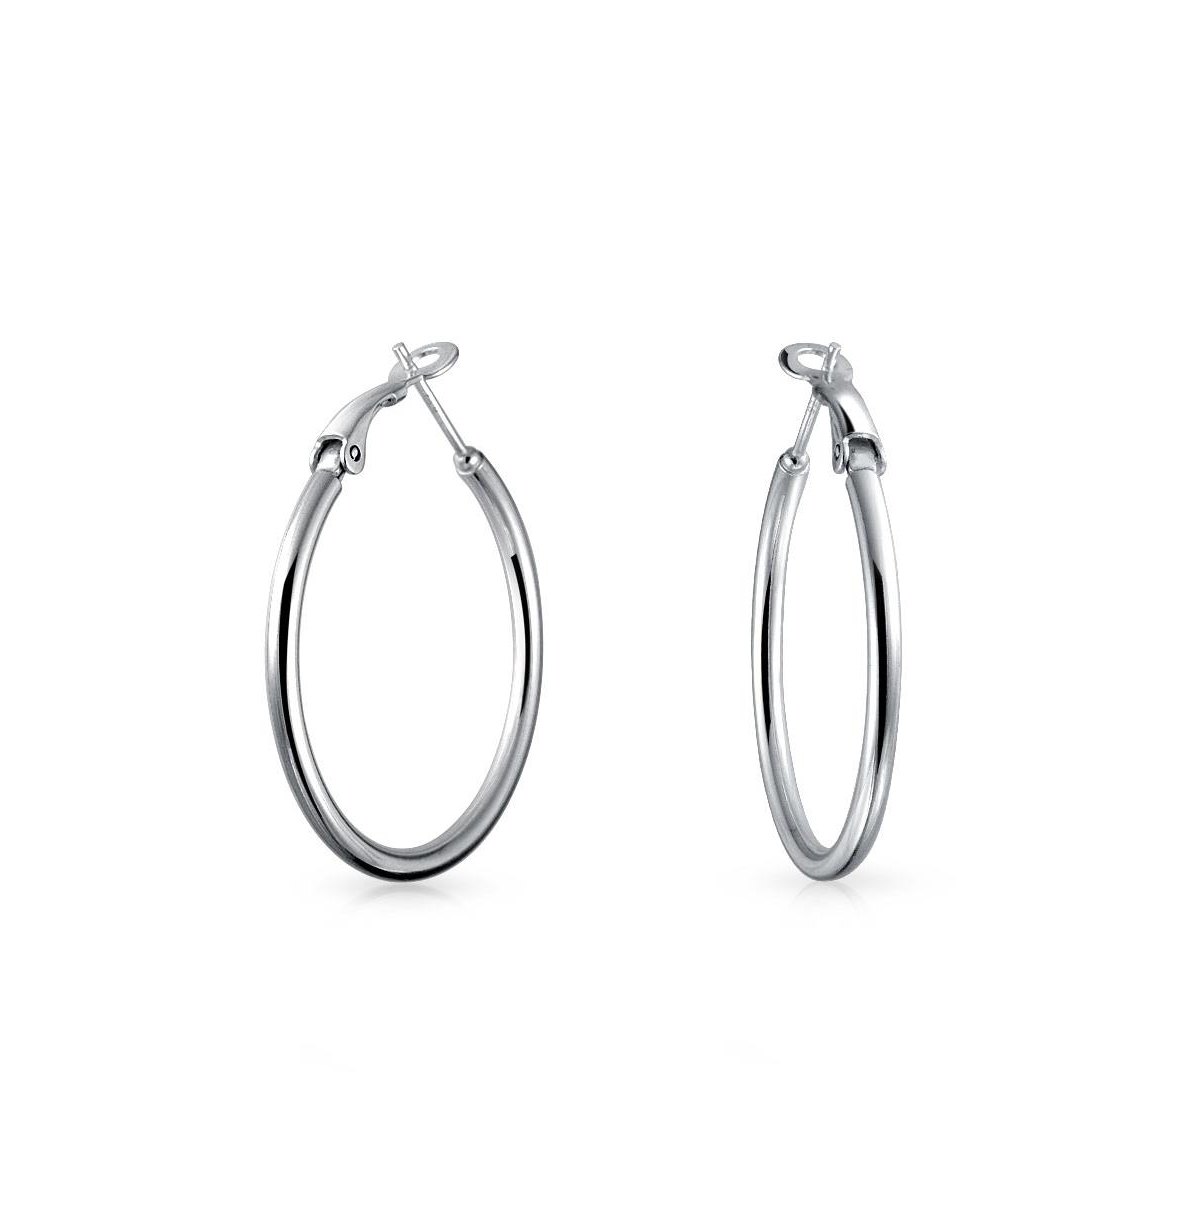 Simple Plain Polished Finish Round Tube Hoop Earrings For Women .925 Sterling Silver Hinged Notched Post 1.4 Inch Diameter - Silver